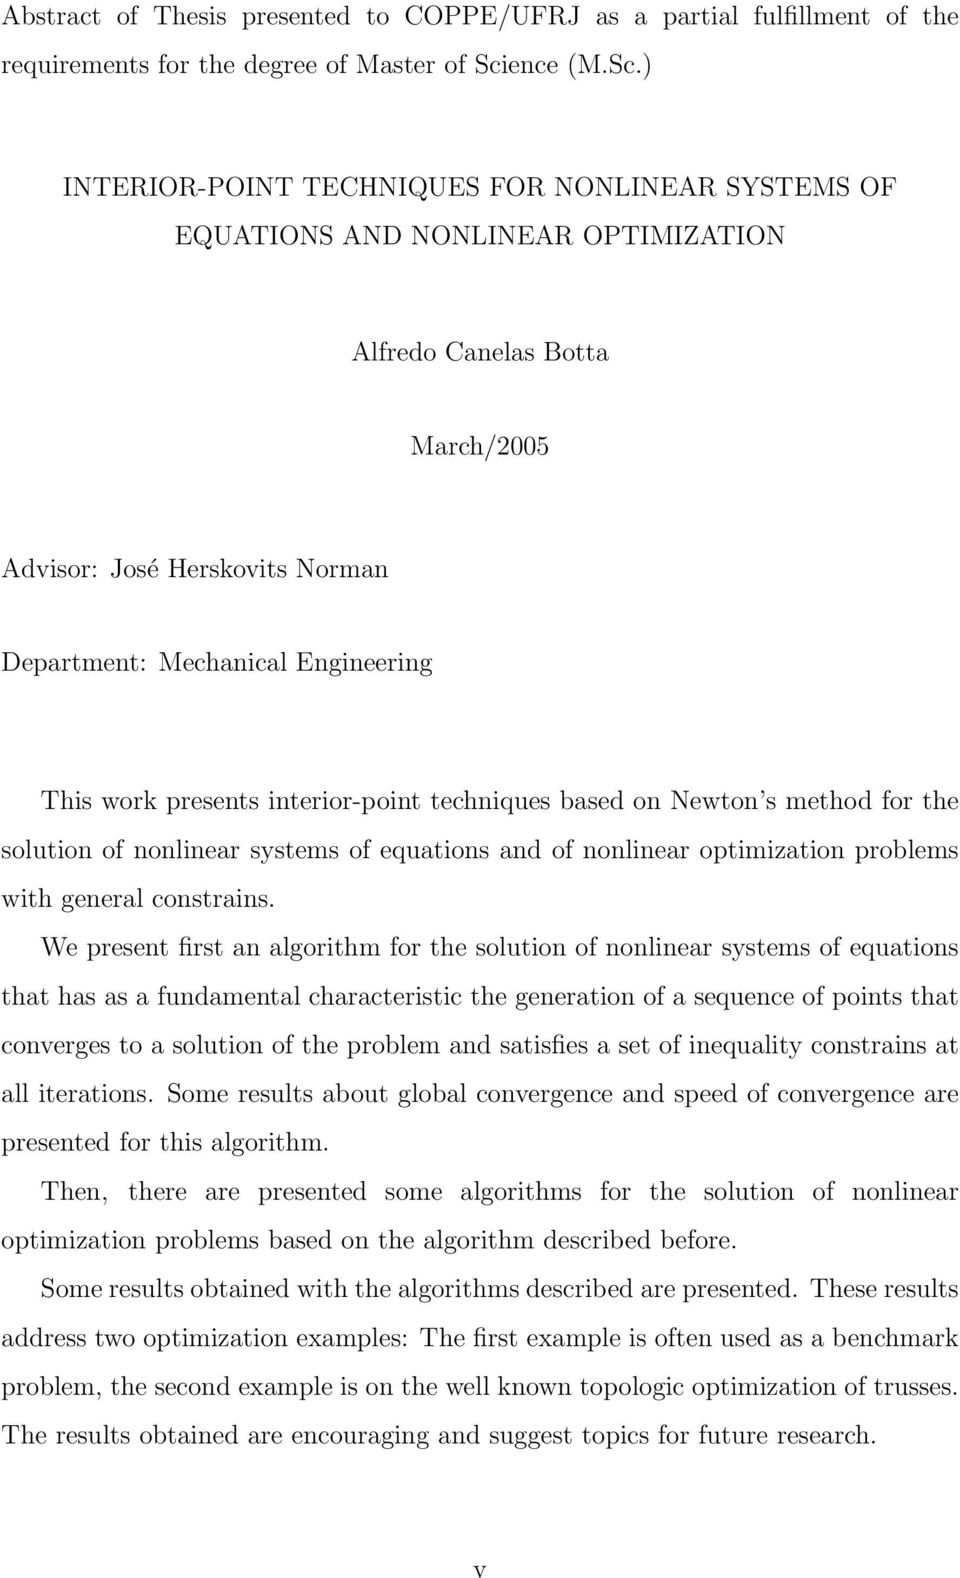 ) INTERIOR-POINT TECHNIQUES FOR NONLINEAR SYSTEMS OF EQUATIONS AND NONLINEAR OPTIMIZATION Alfredo Canelas Botta March/2005 Advisor: José Herskovits Norman Department: Mechanical Engineering This work